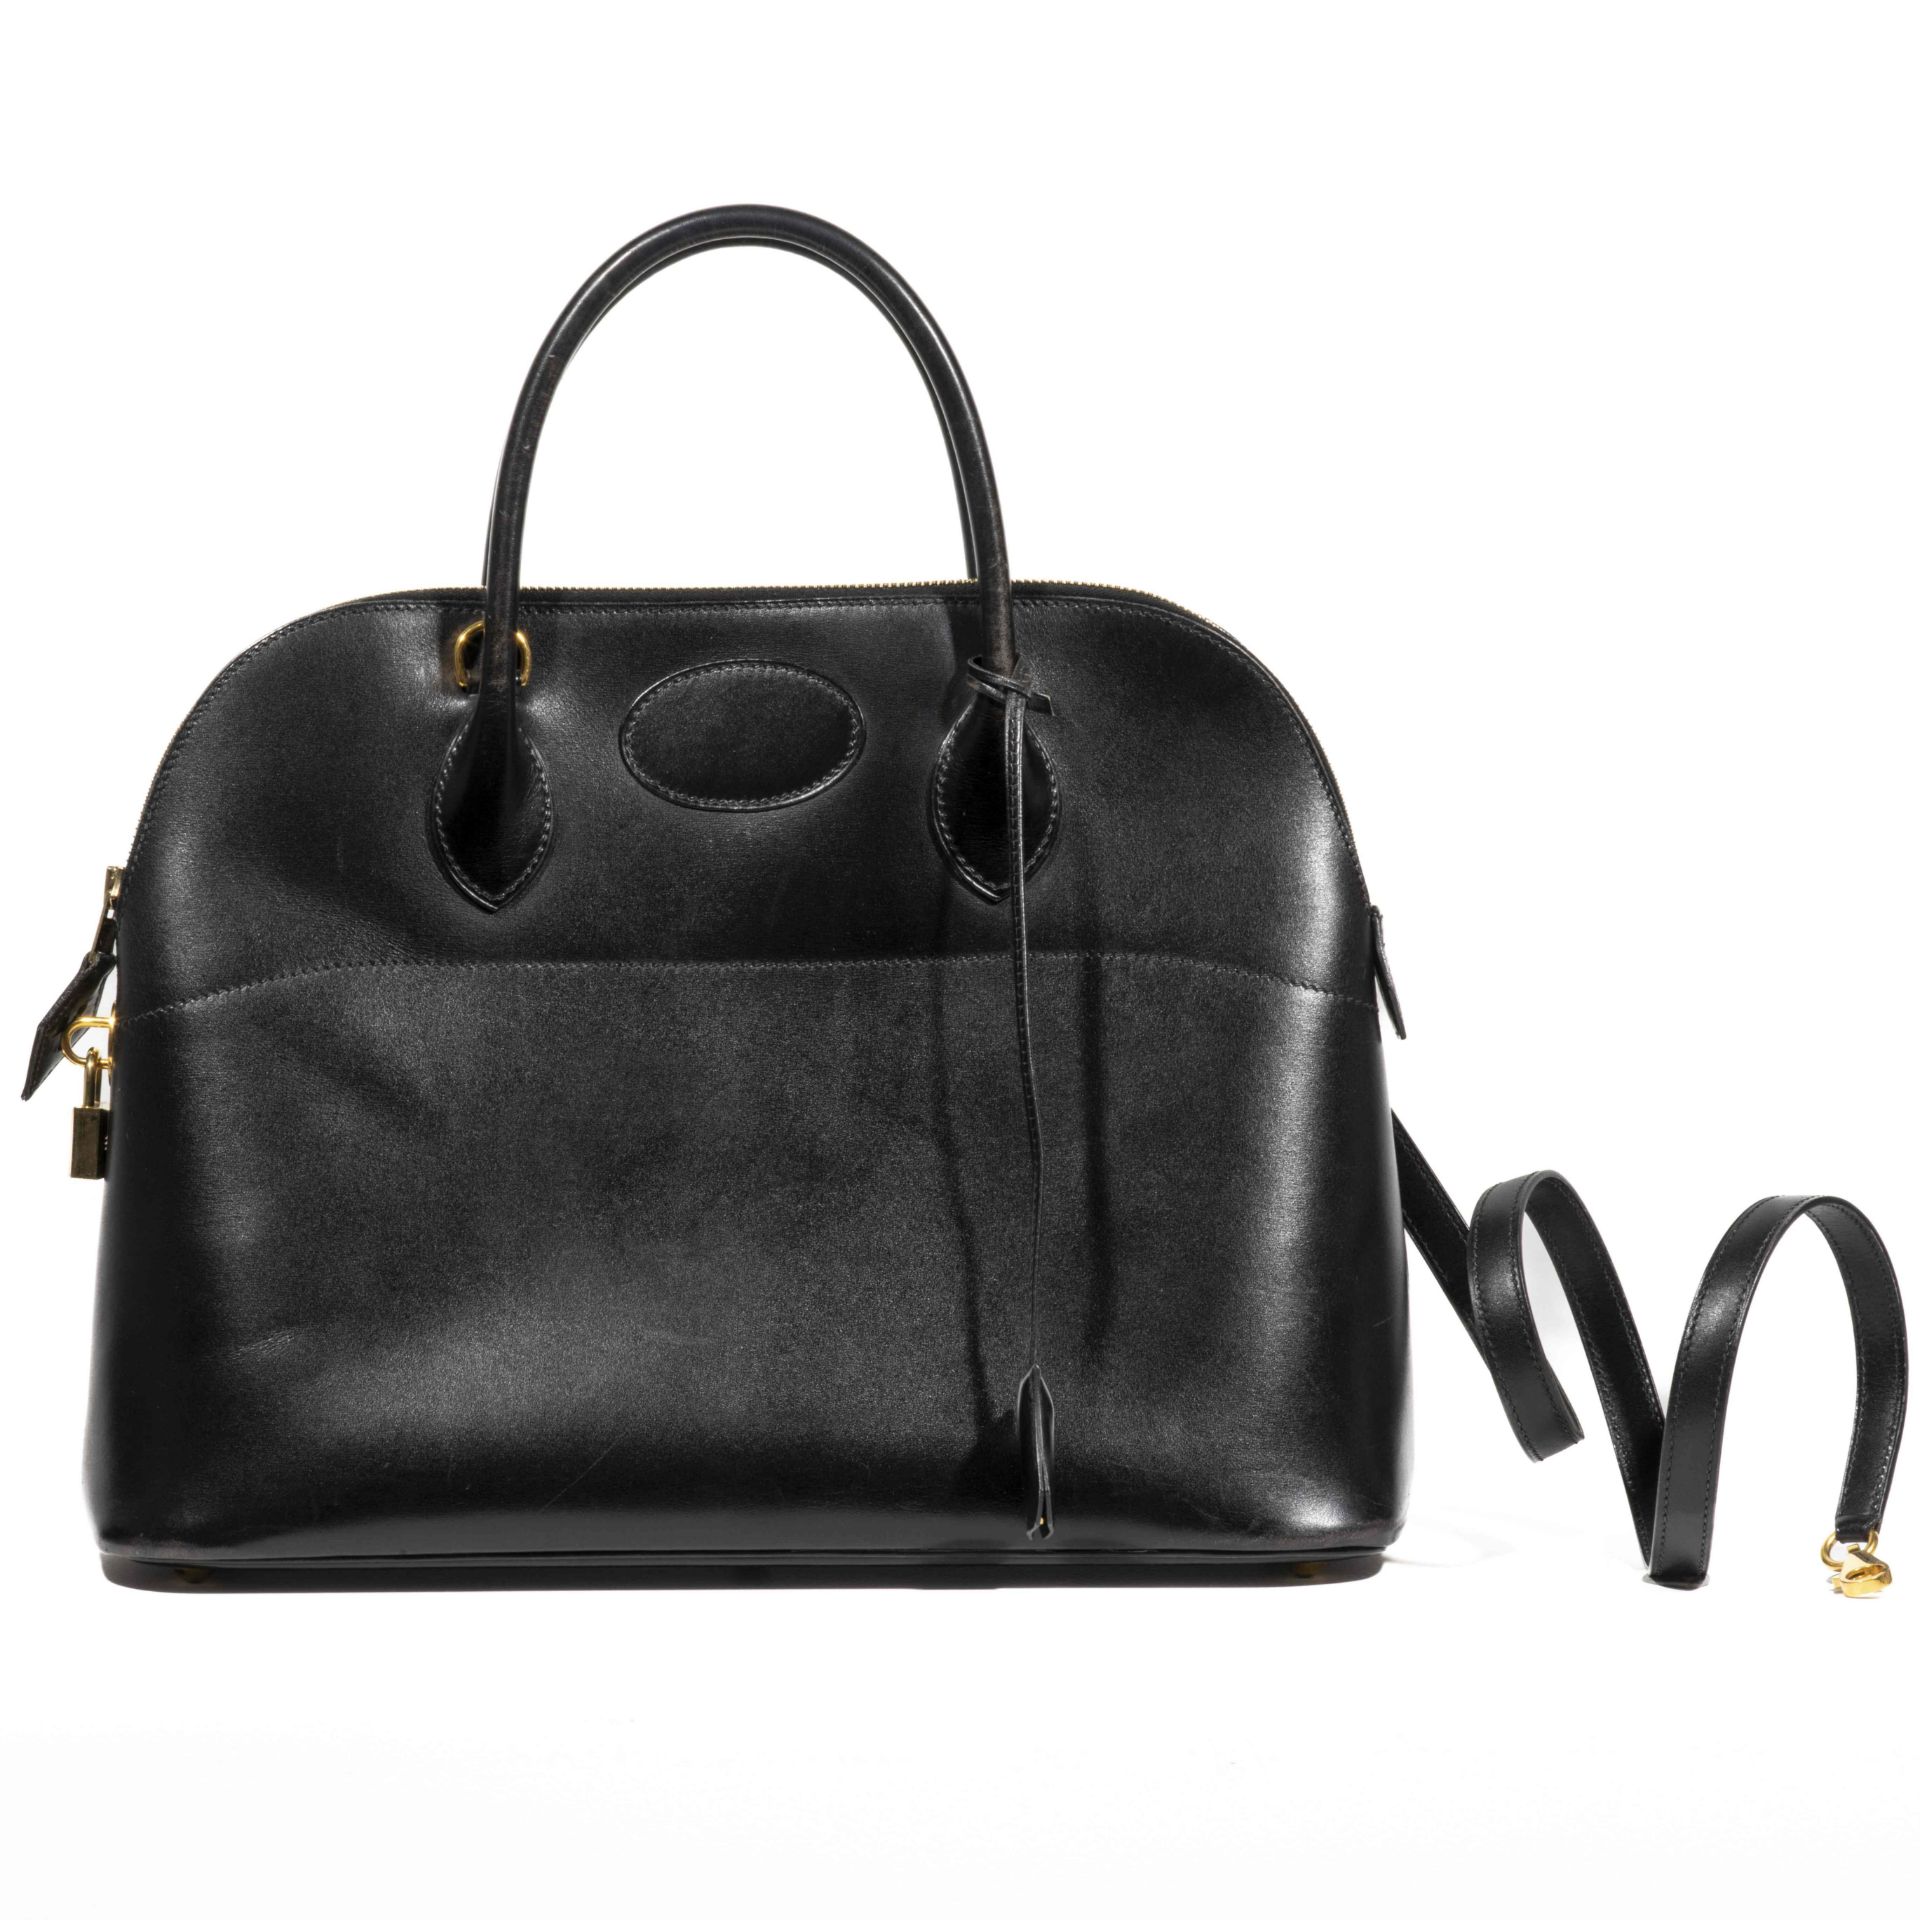 HERMES Paris, made in France. Sac 'Bolide' 35.